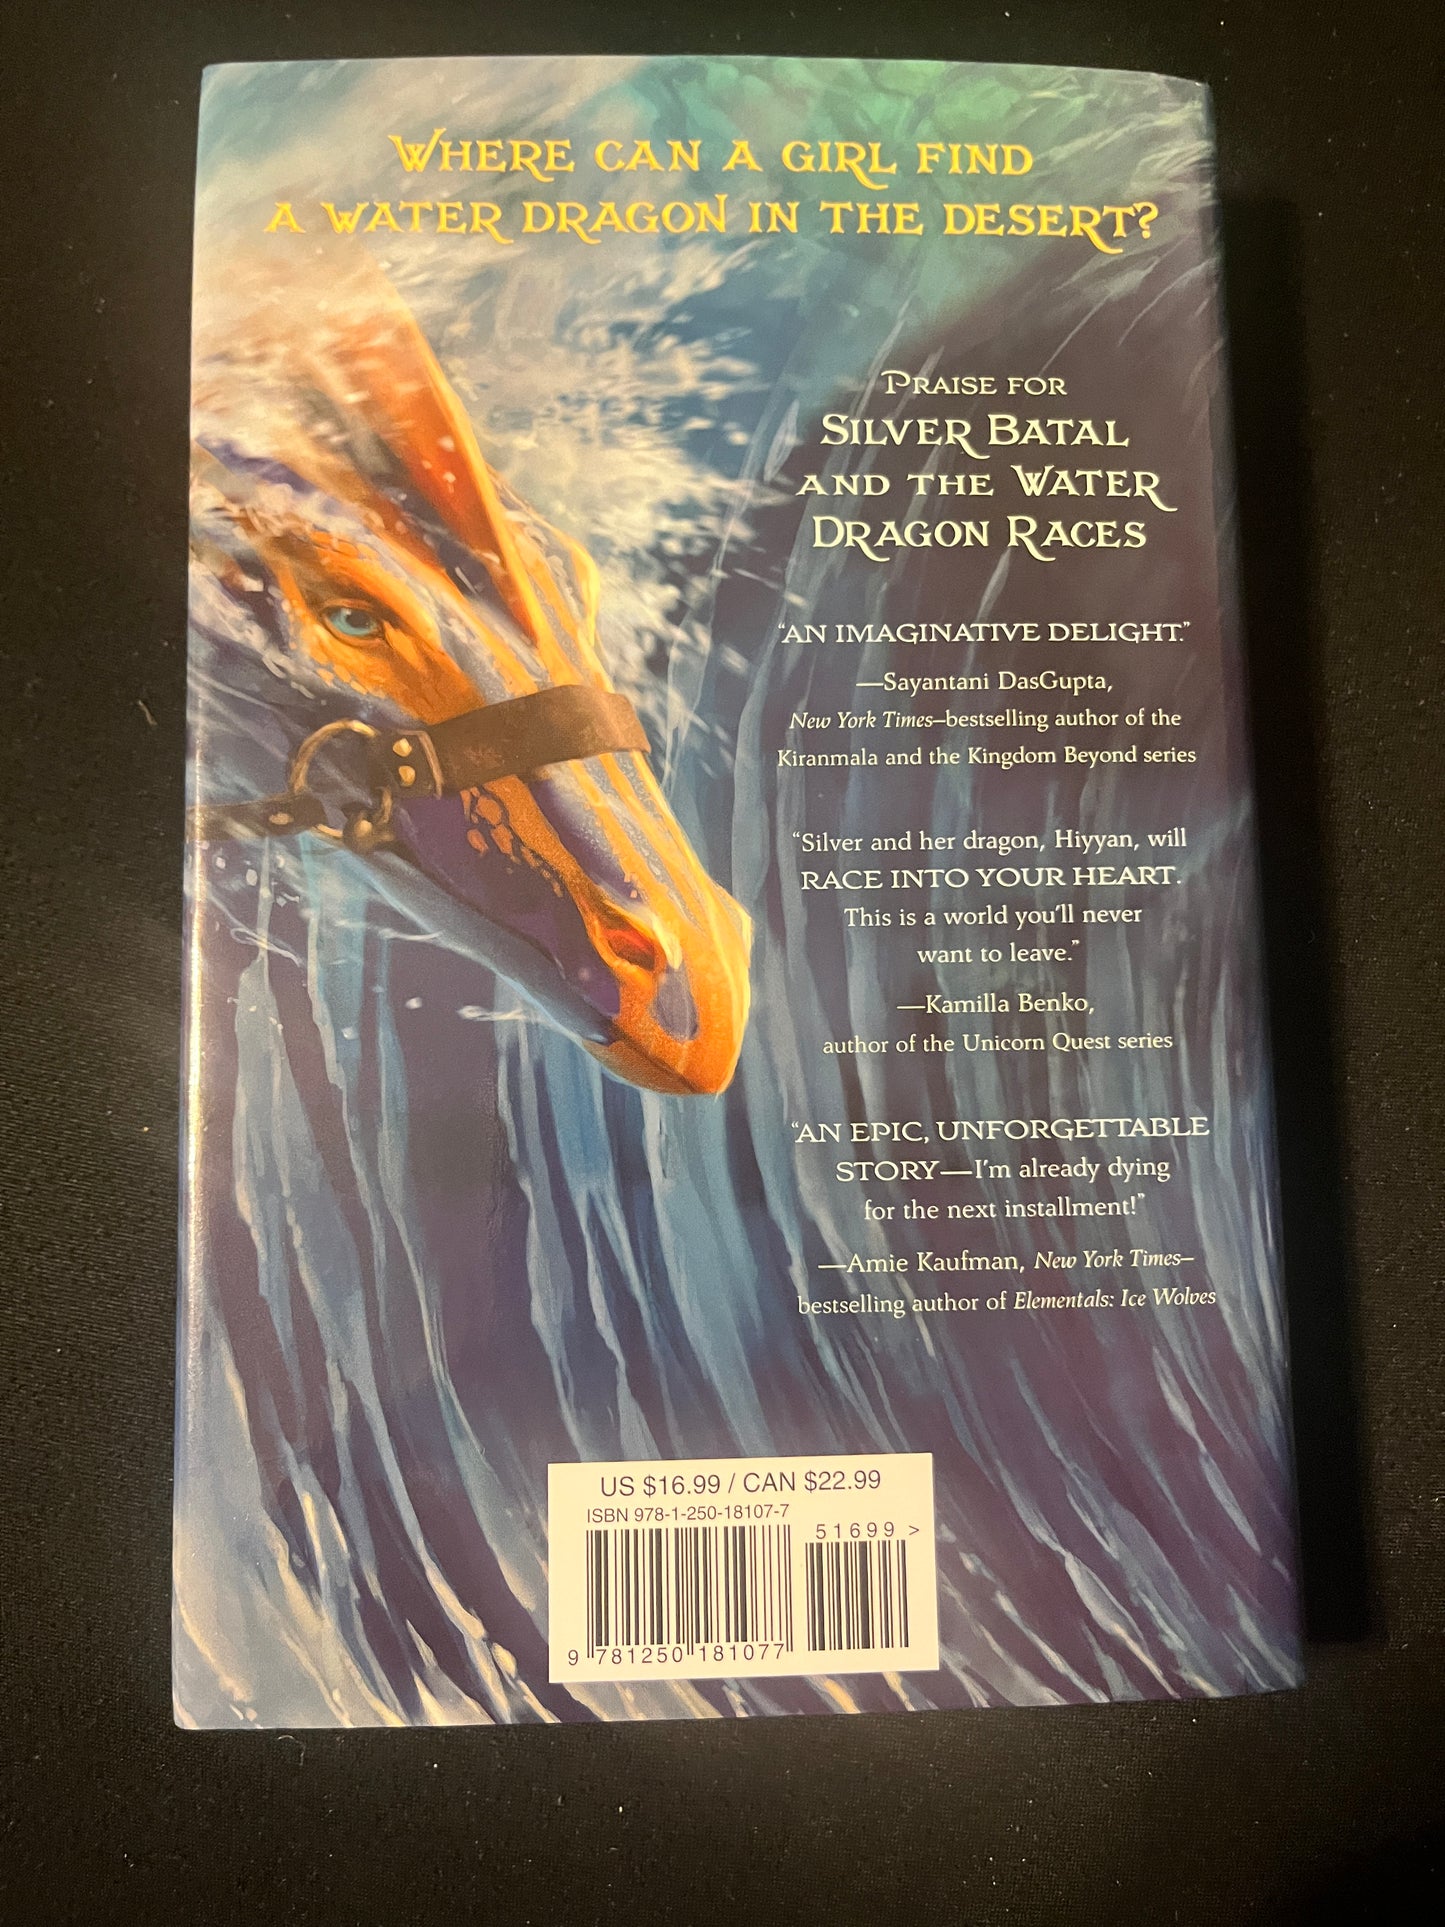 SILVER BATAL AND THE WATER DRAGON RACES by K.D. Halbrook